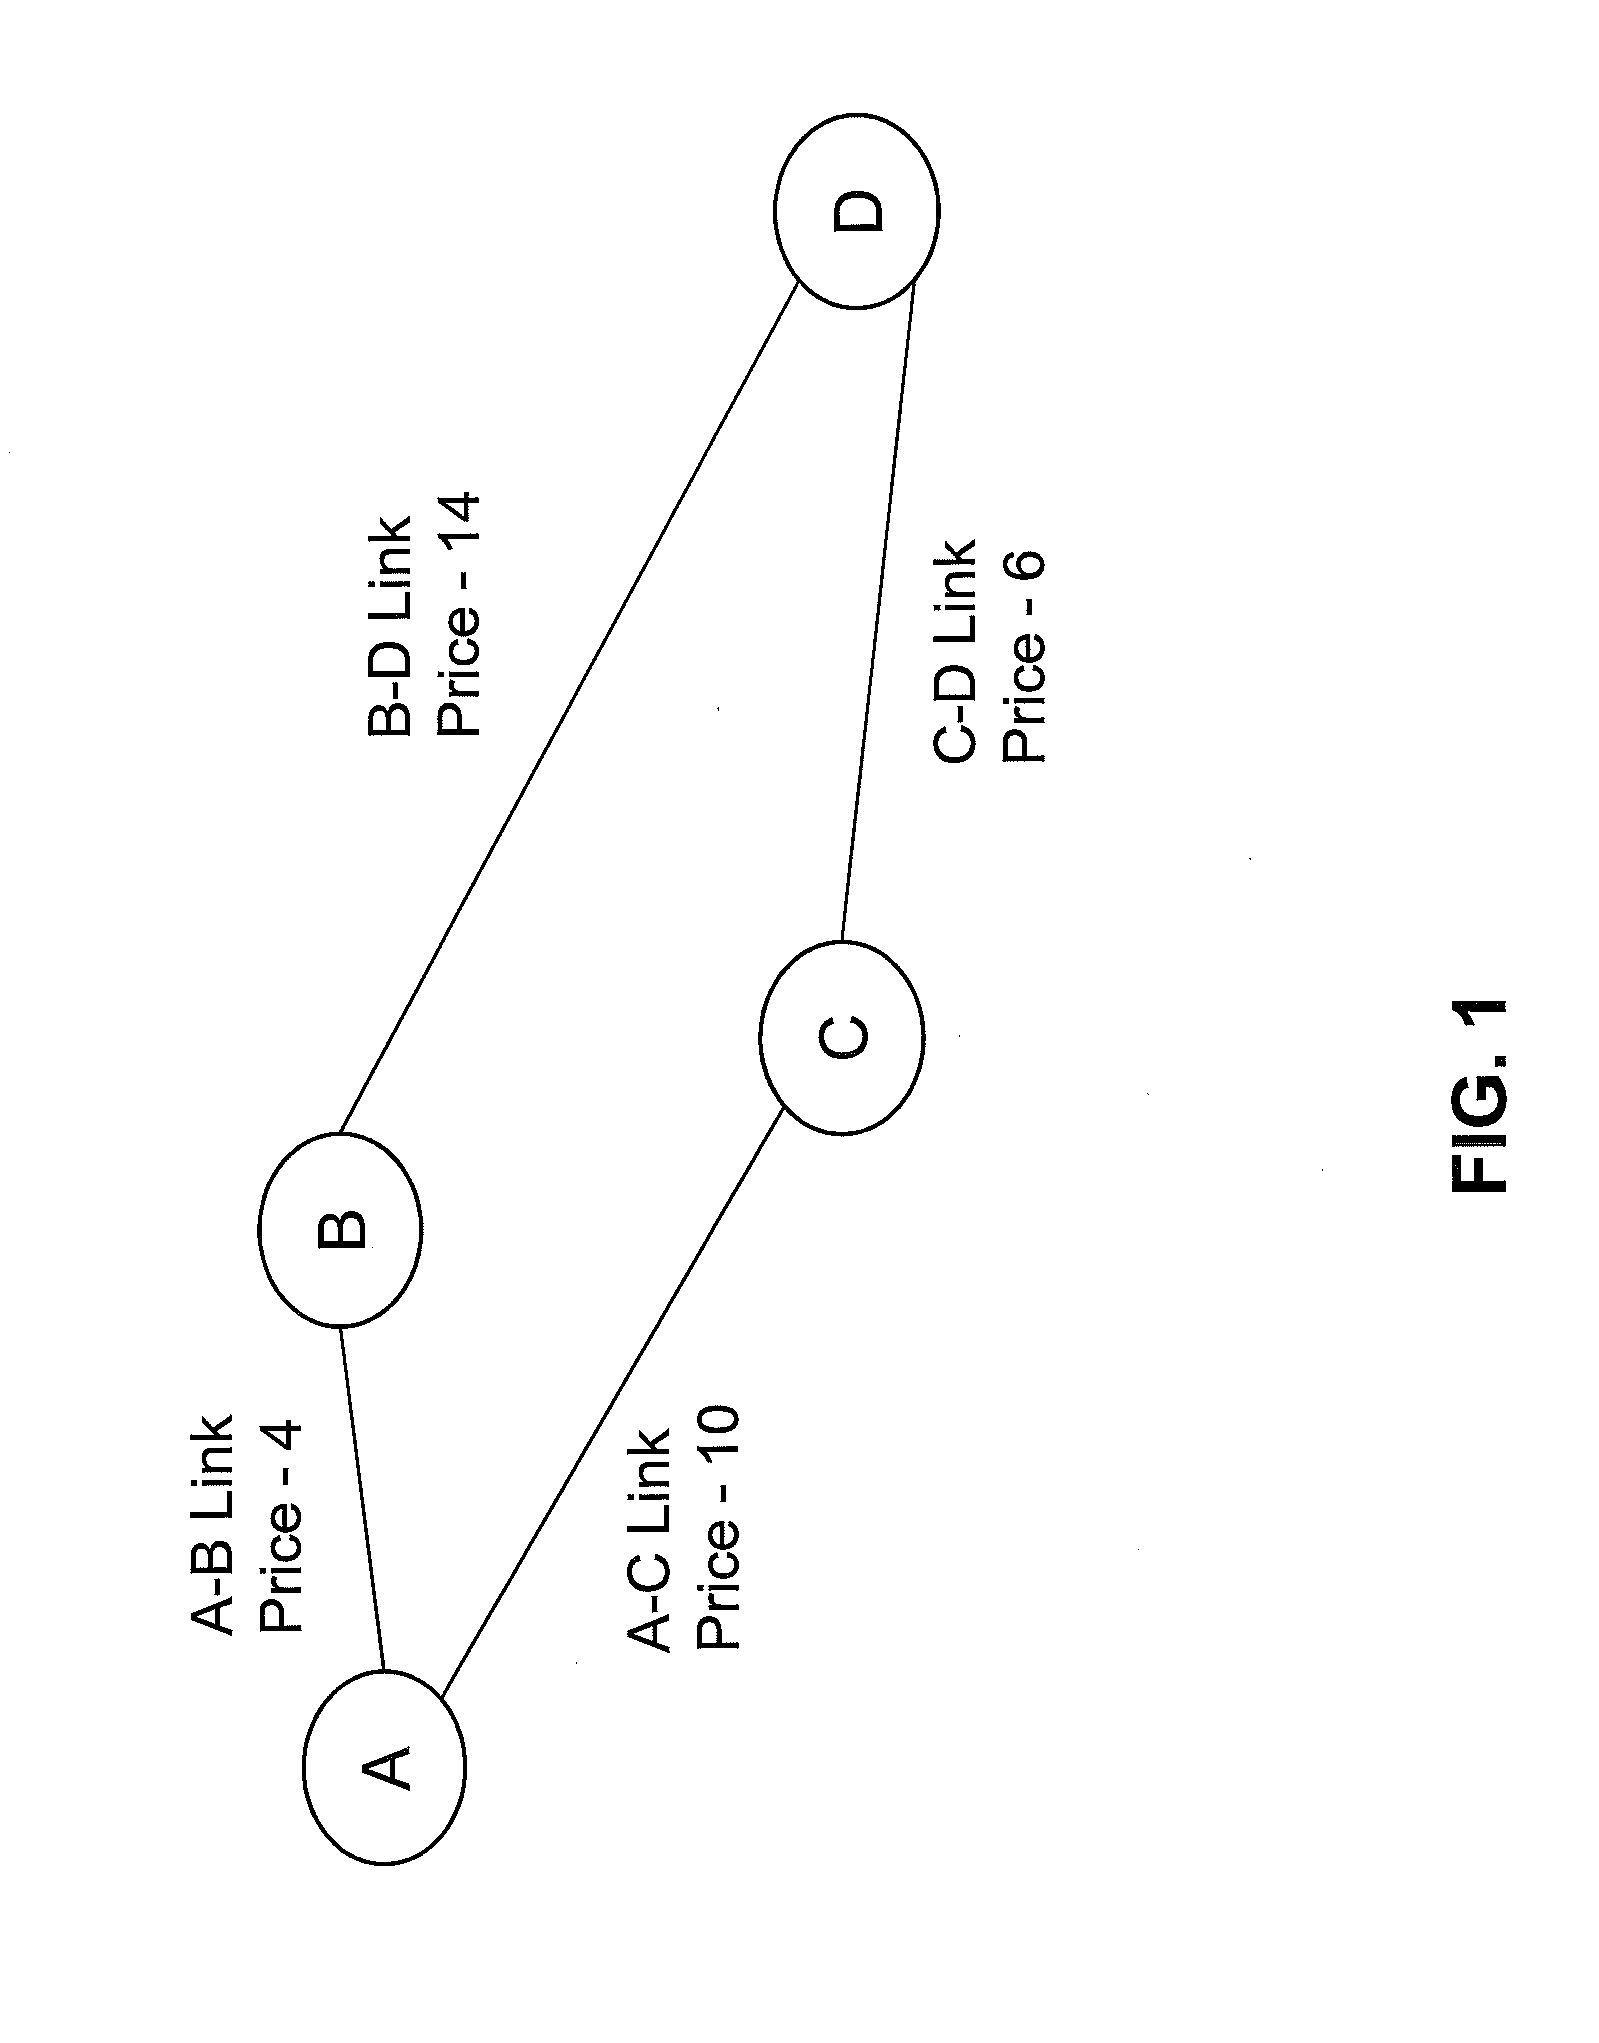 System and methods for improved network routing